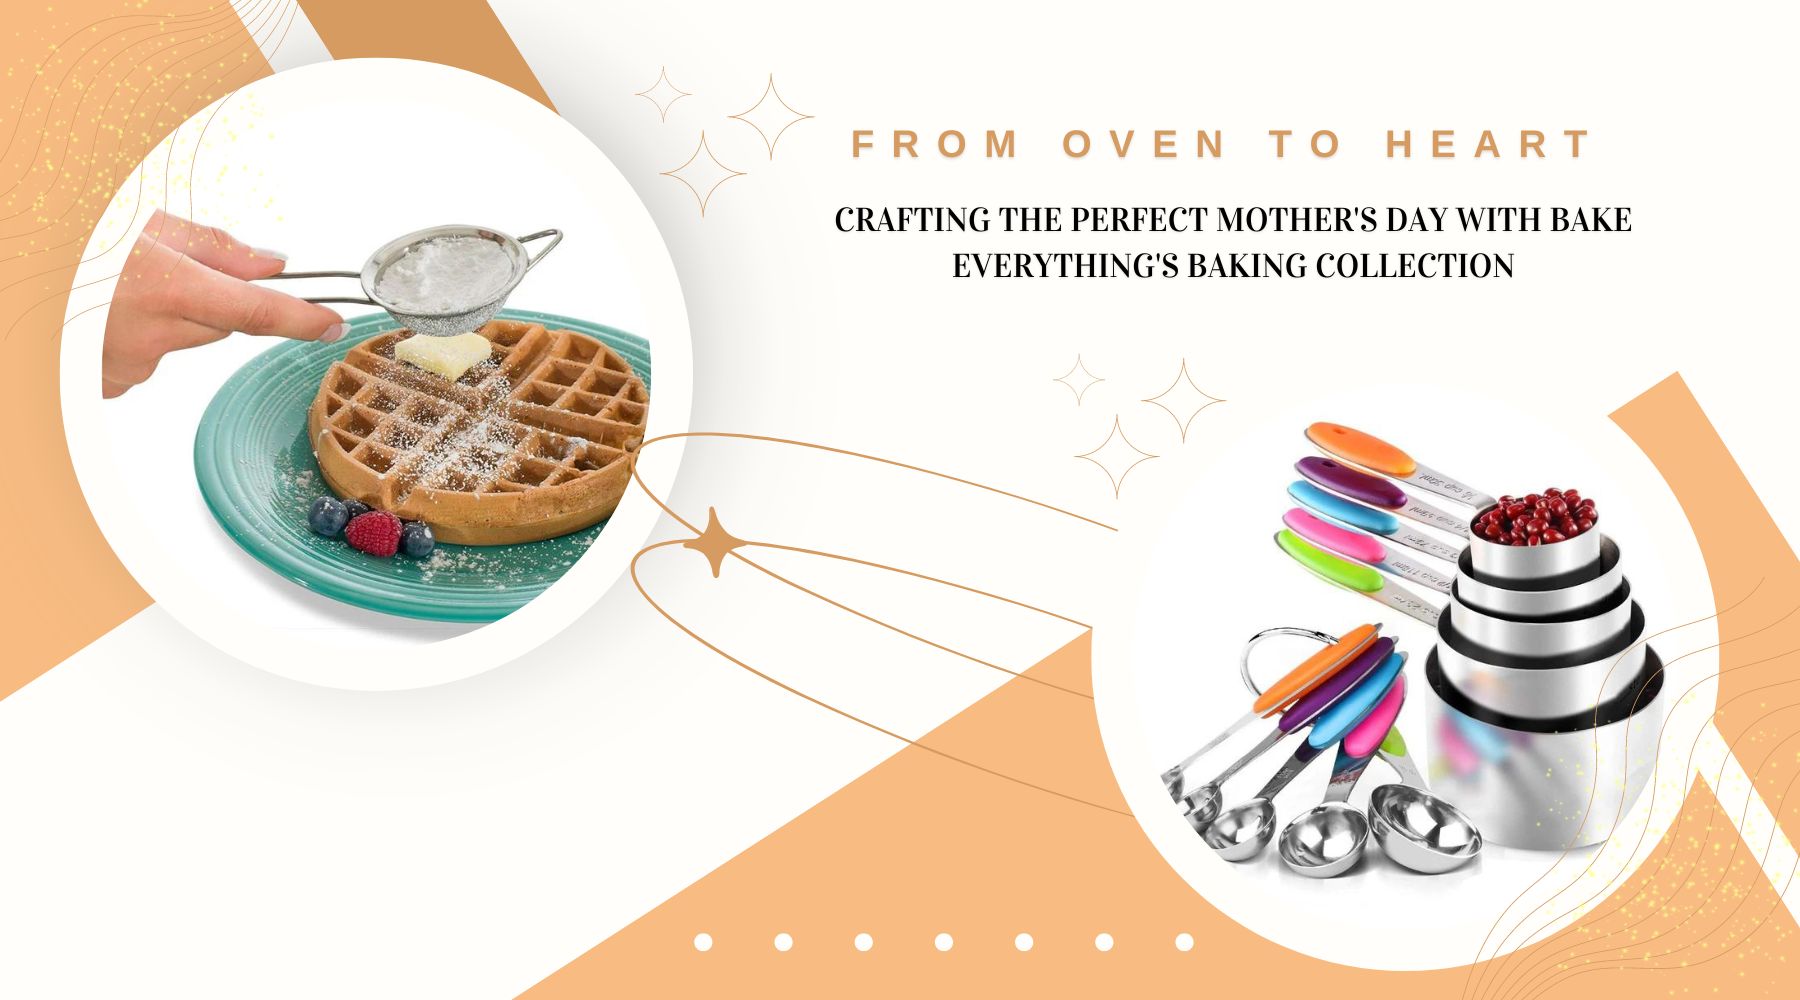 From Oven to Heart: Crafting the Perfect Mother's Day with Bake Everything's Baking Collection